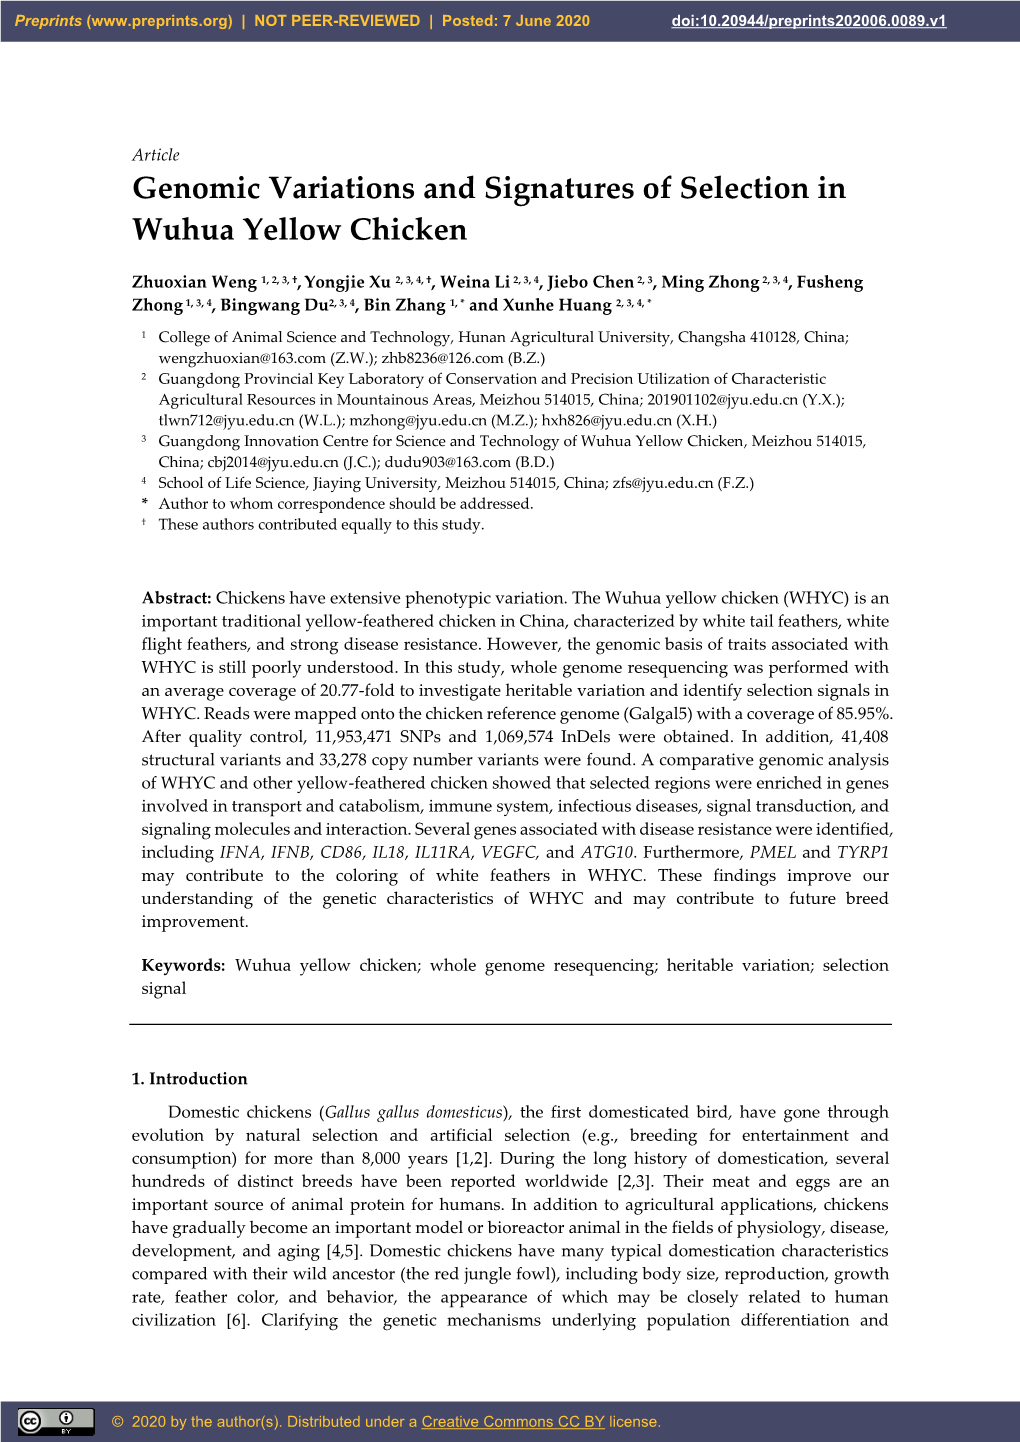 Genomic Variations and Signatures of Selection in Wuhua Yellow Chicken